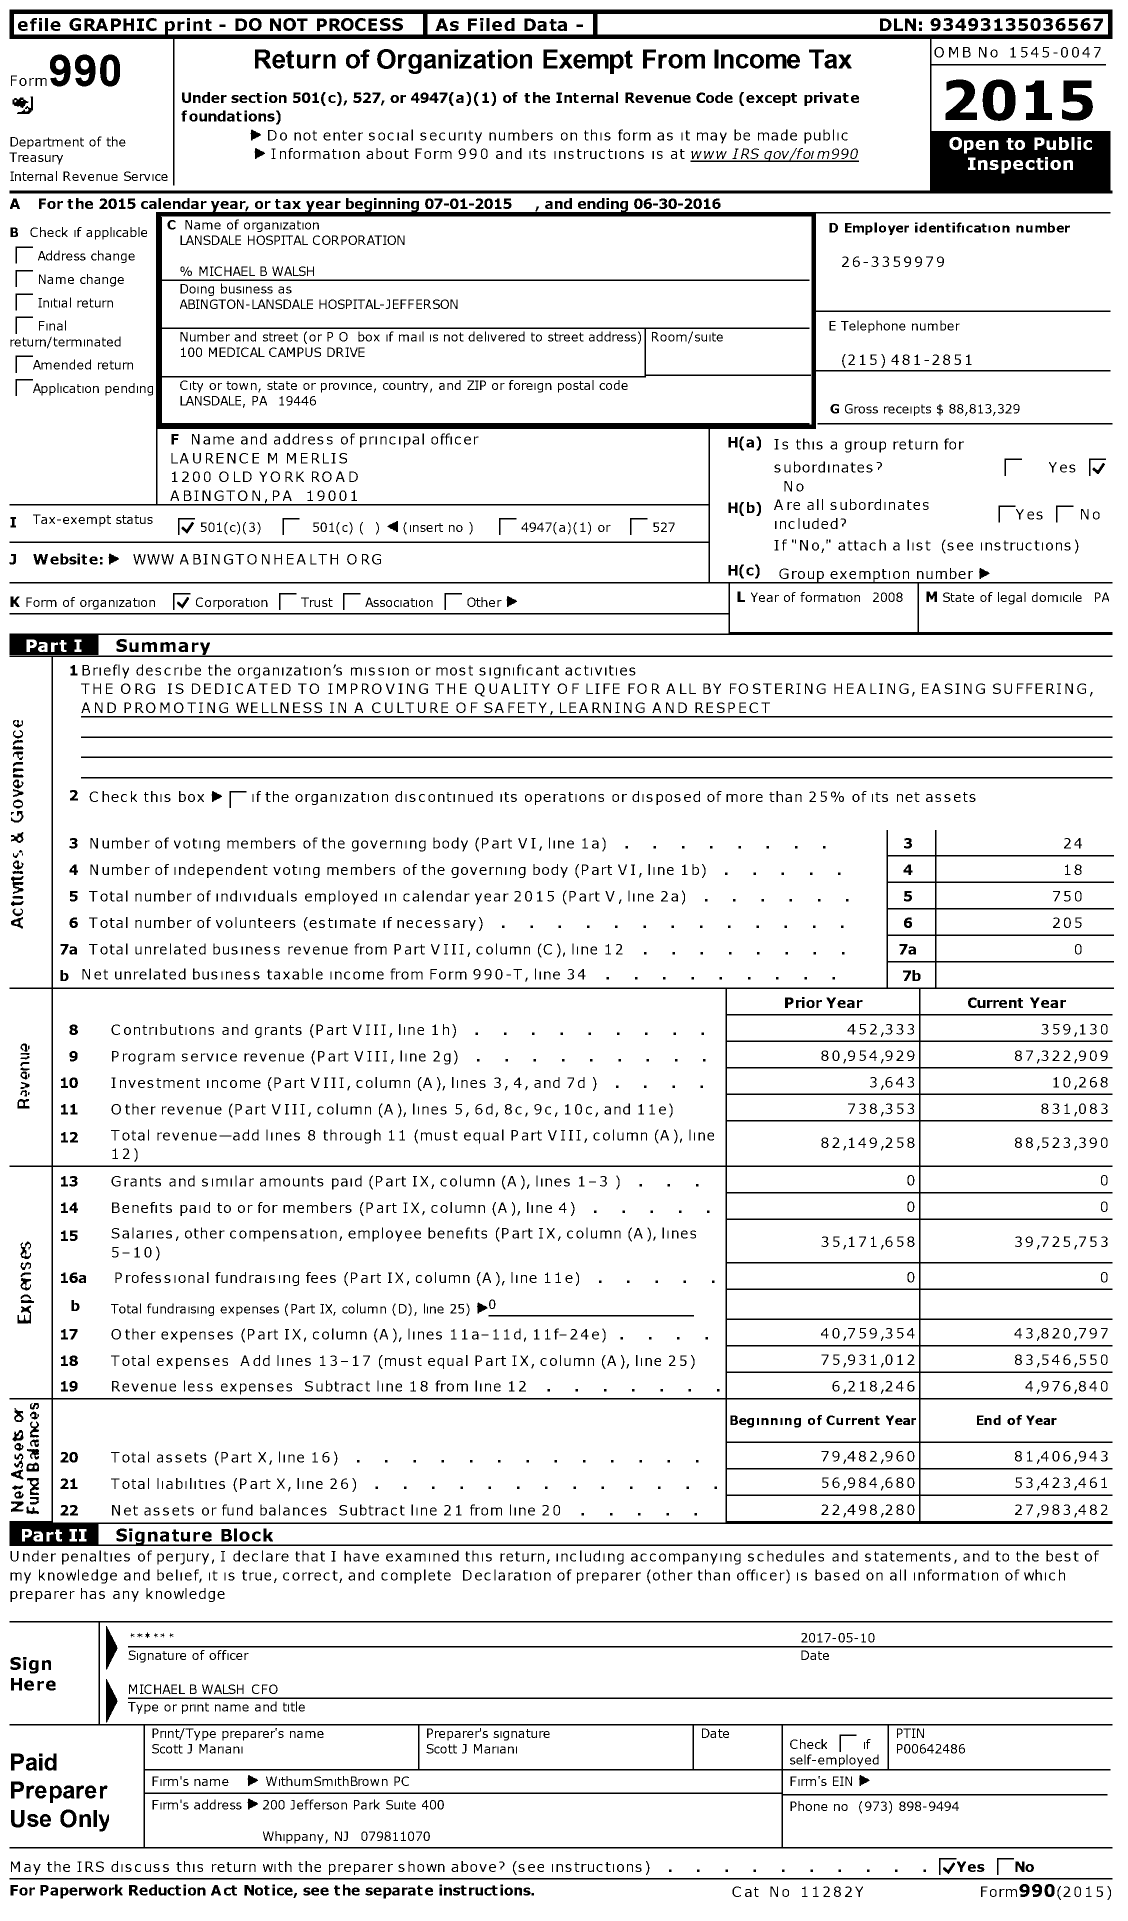 Image of first page of 2015 Form 990 for Abington-Lansdale Hospital-Jefferson